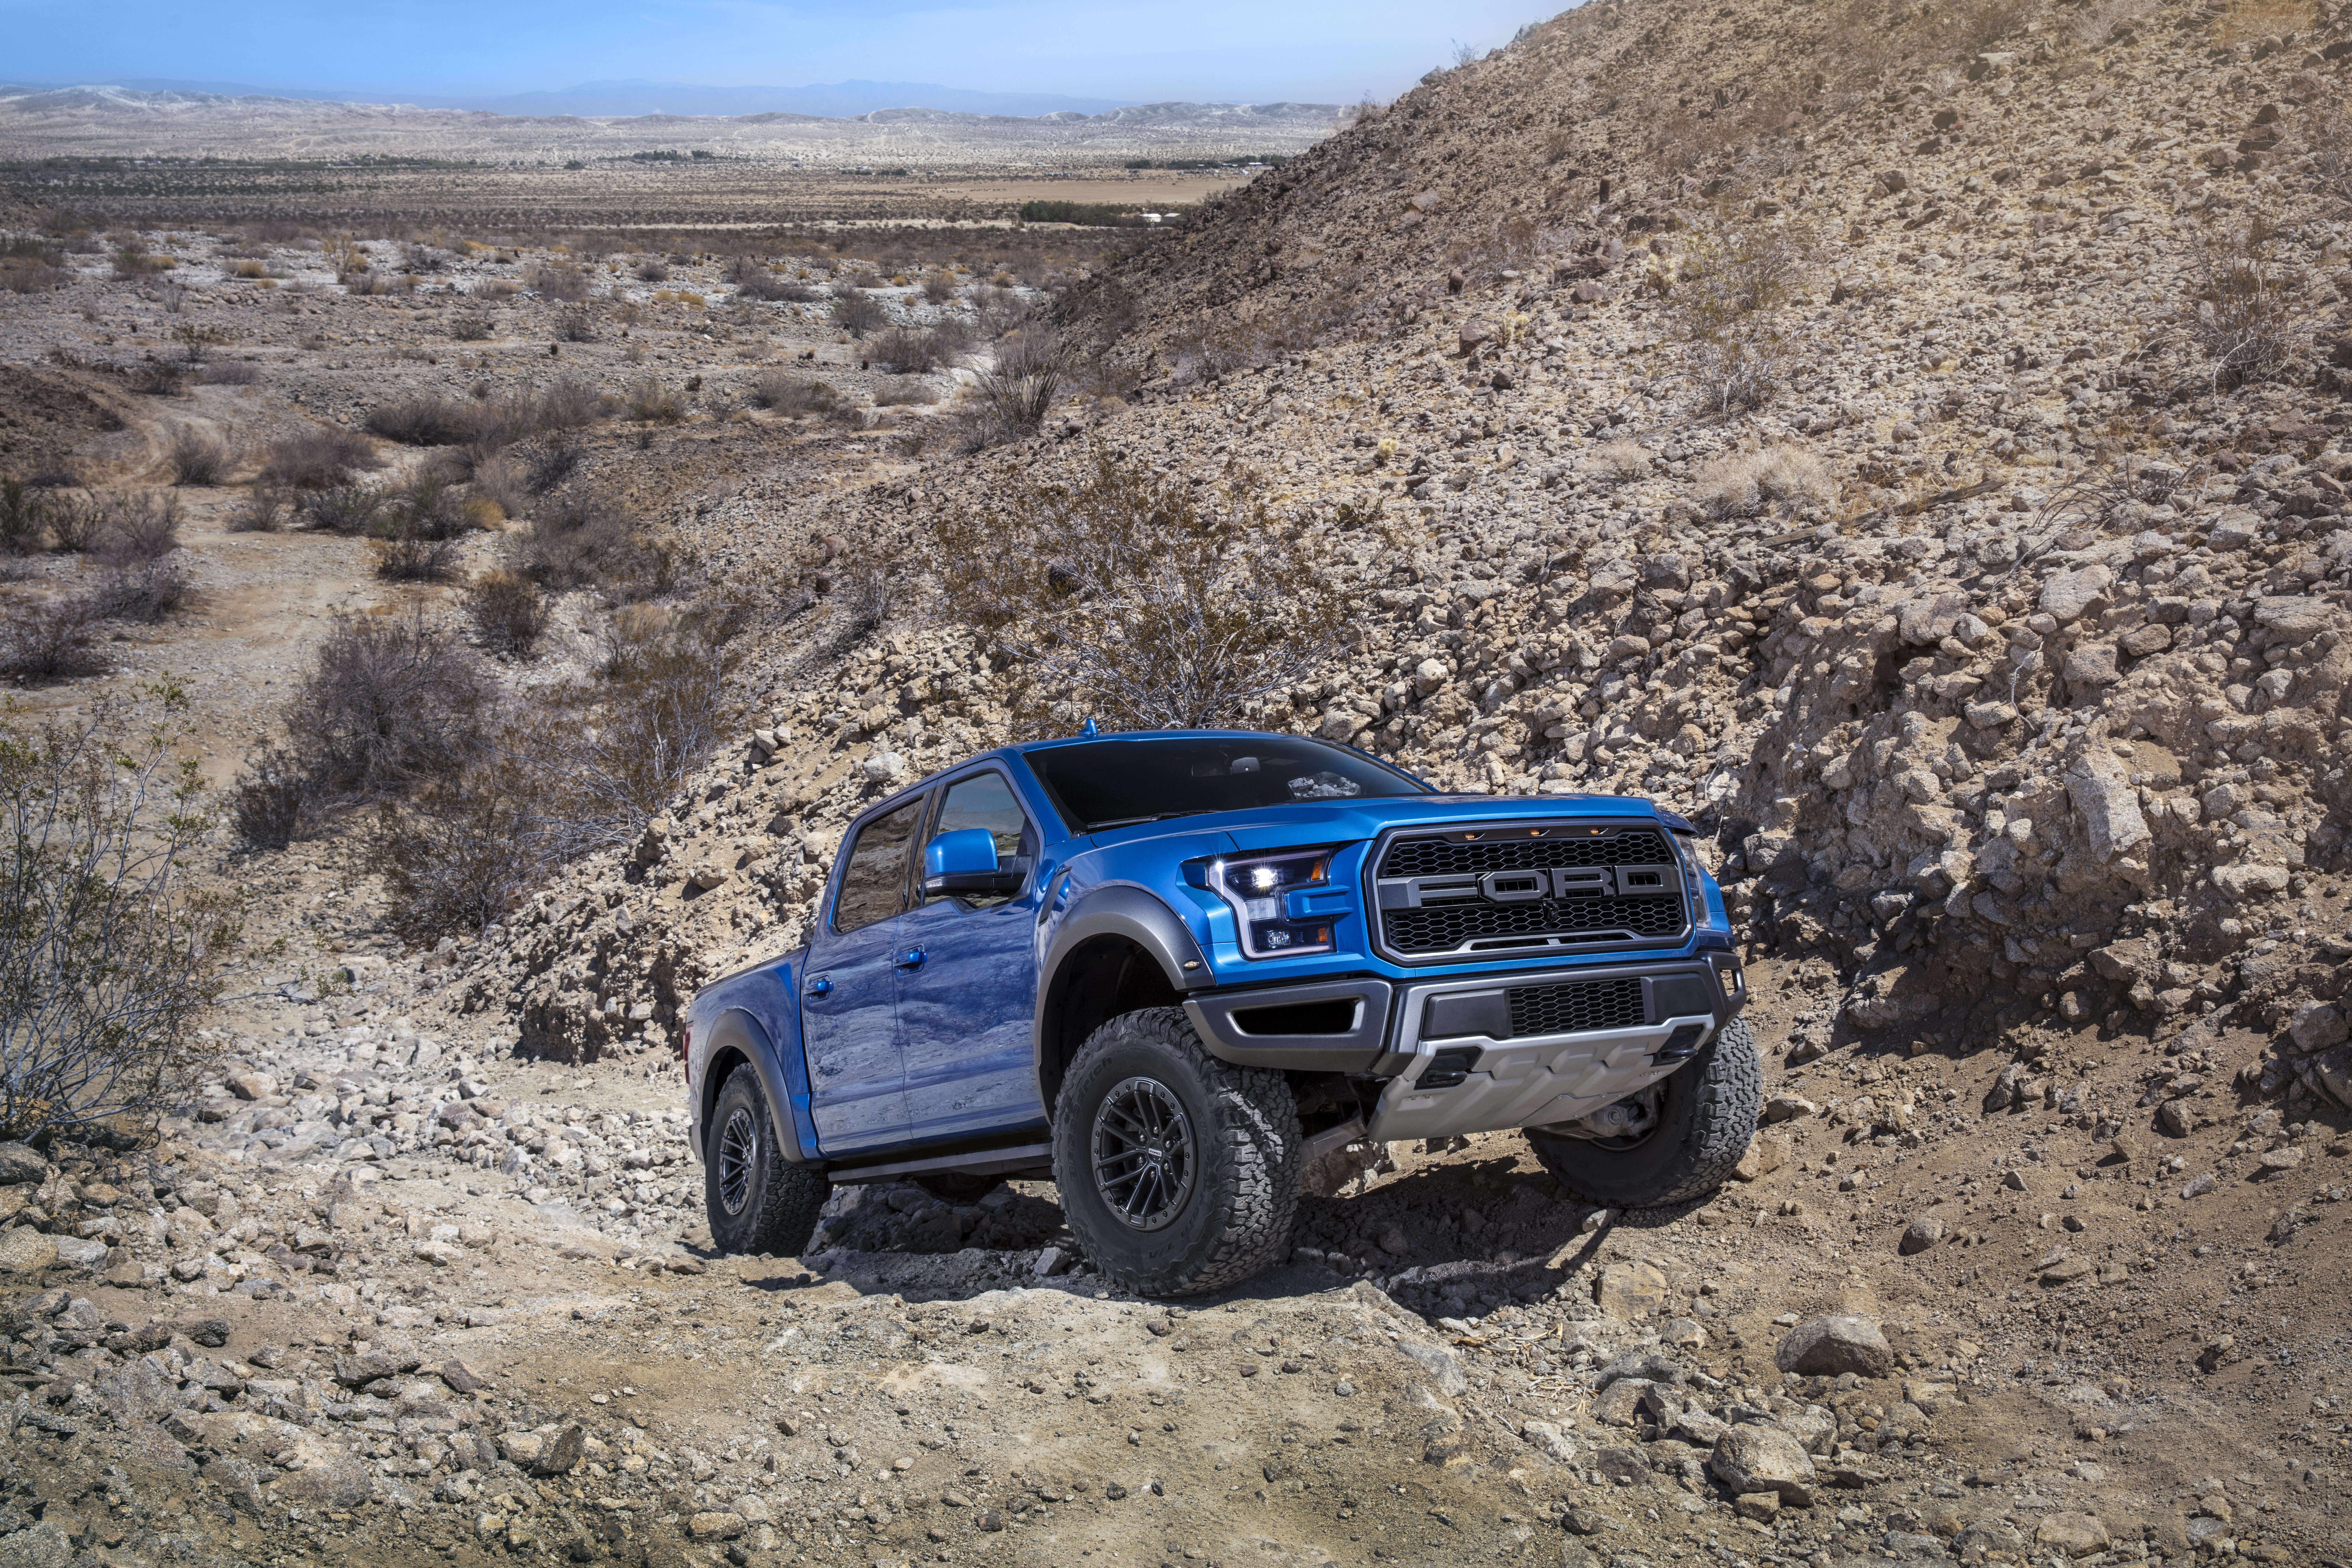 Ford F-150 vs. Toyota Tacoma: Which is the Better Truck?